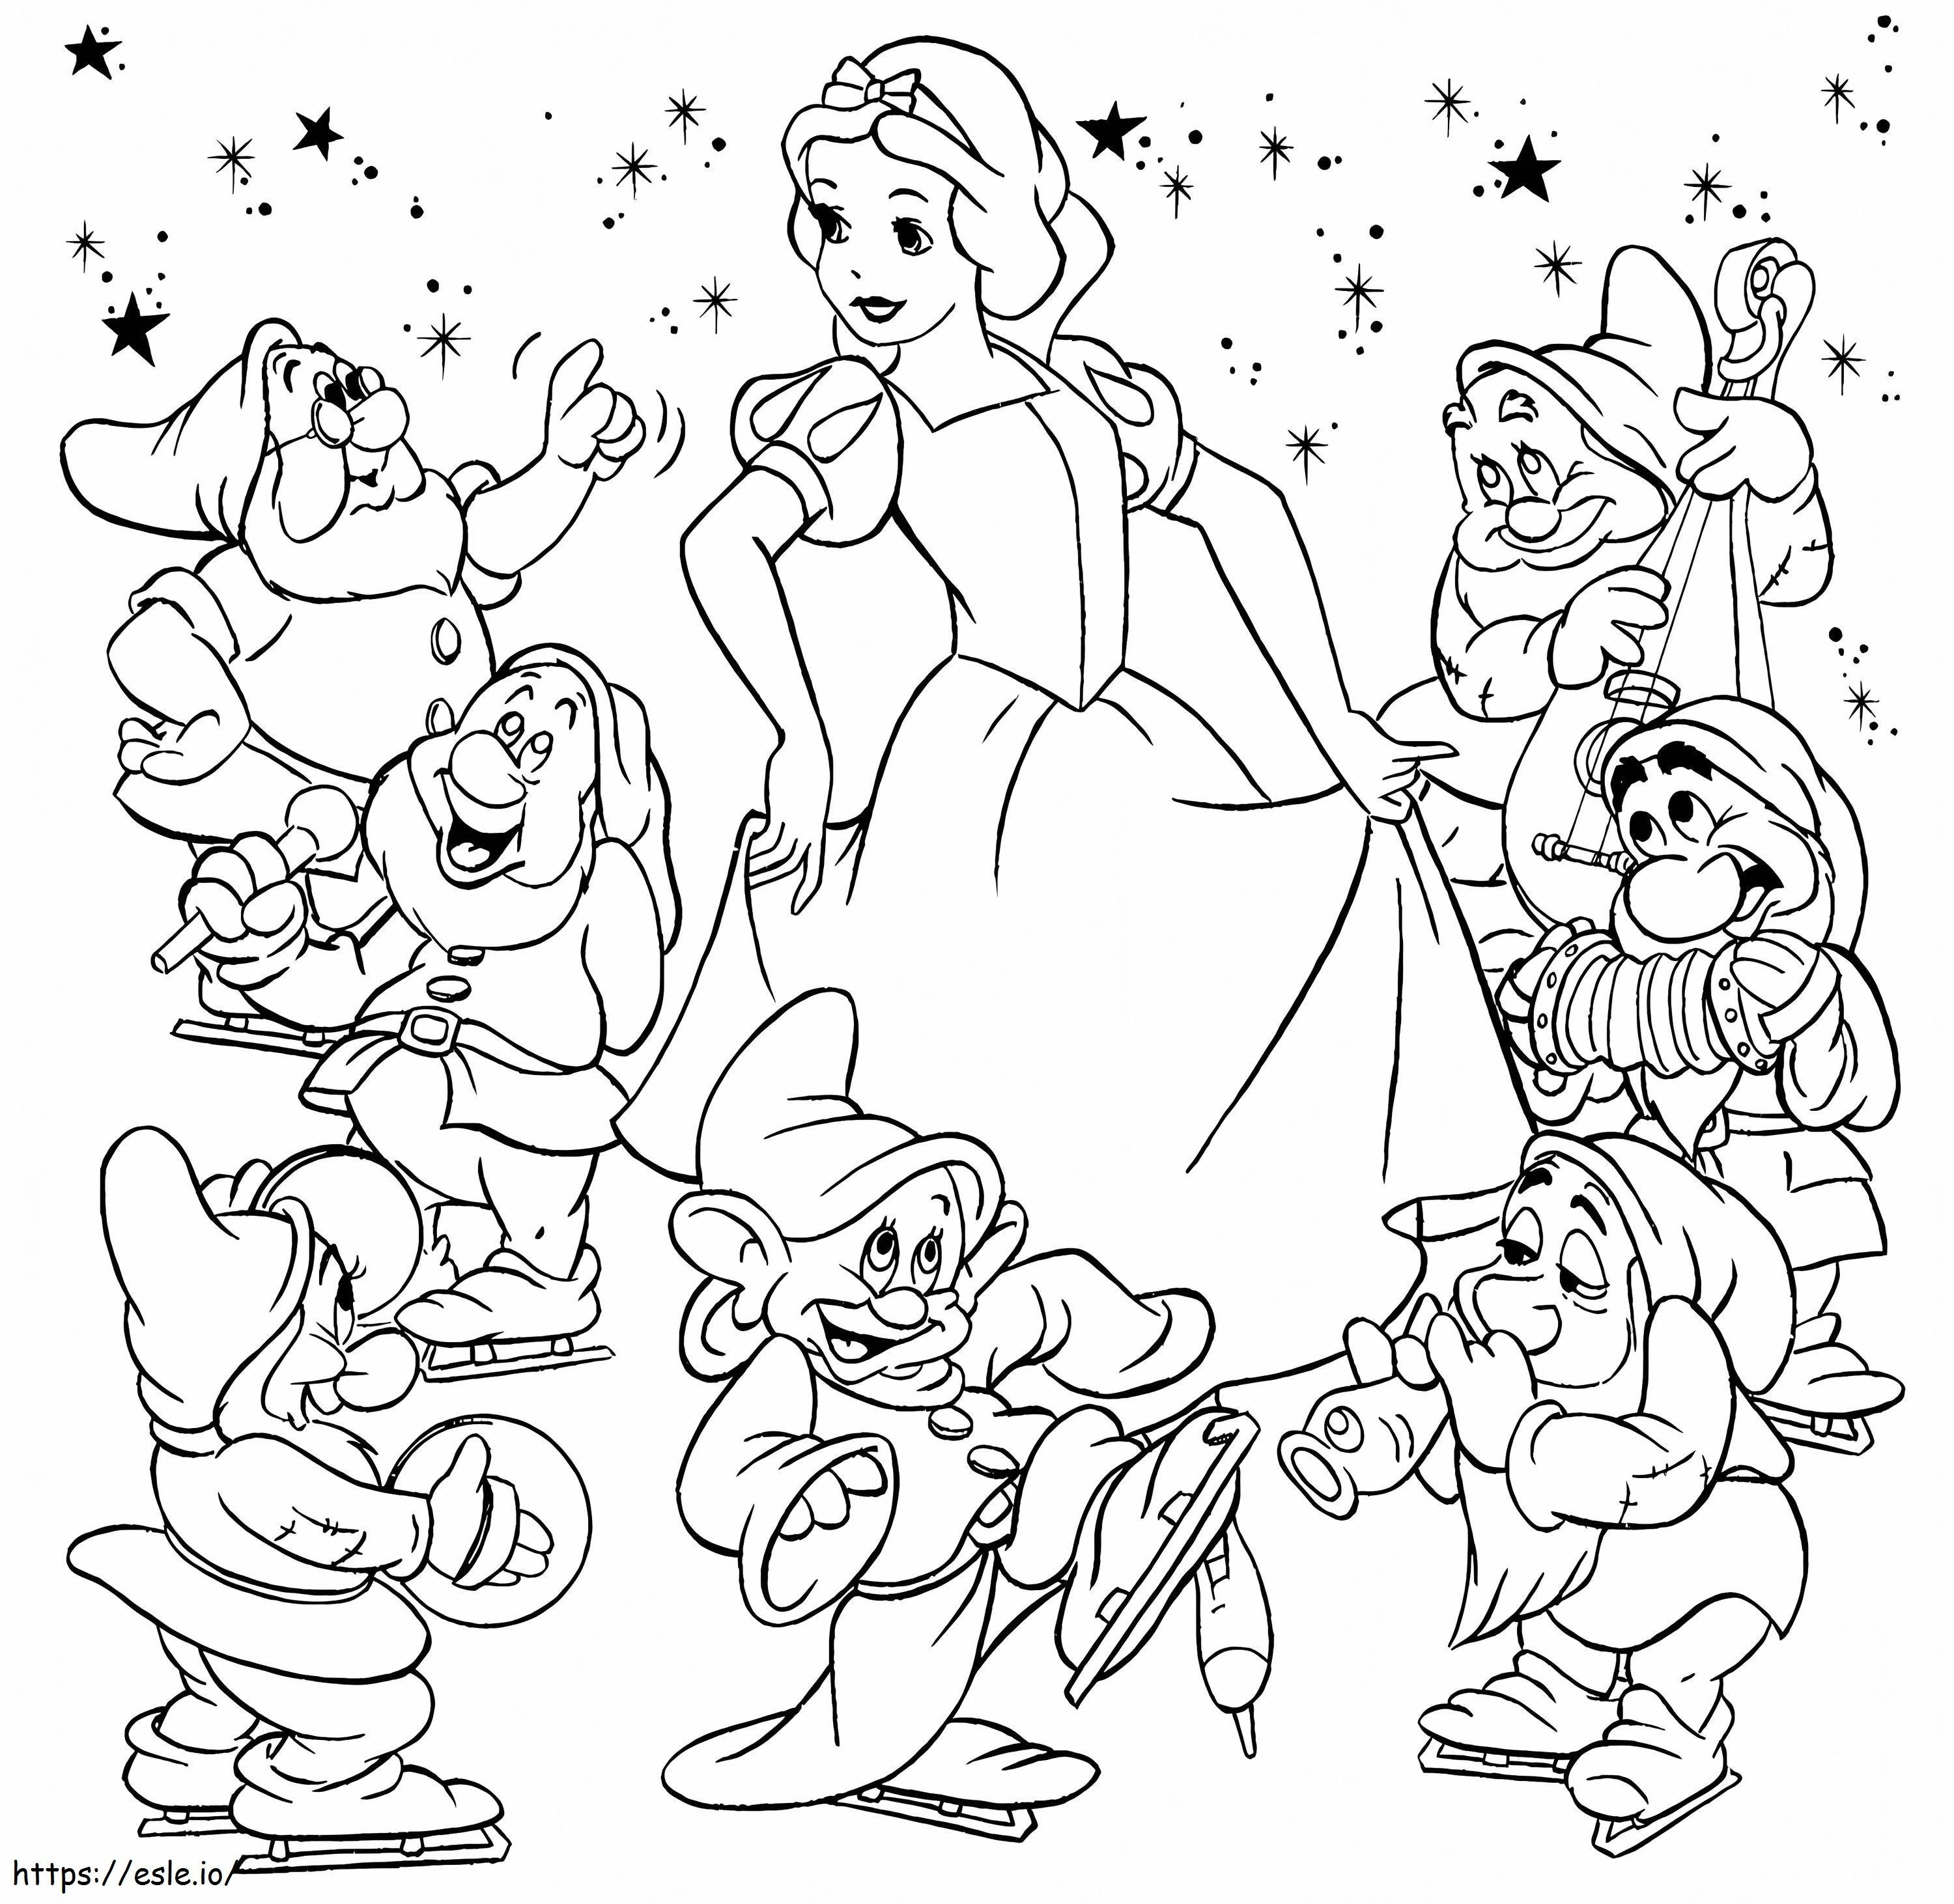 1528341360_Snow White_Coloring_Pages_From_Brooklyn A4 kifestő